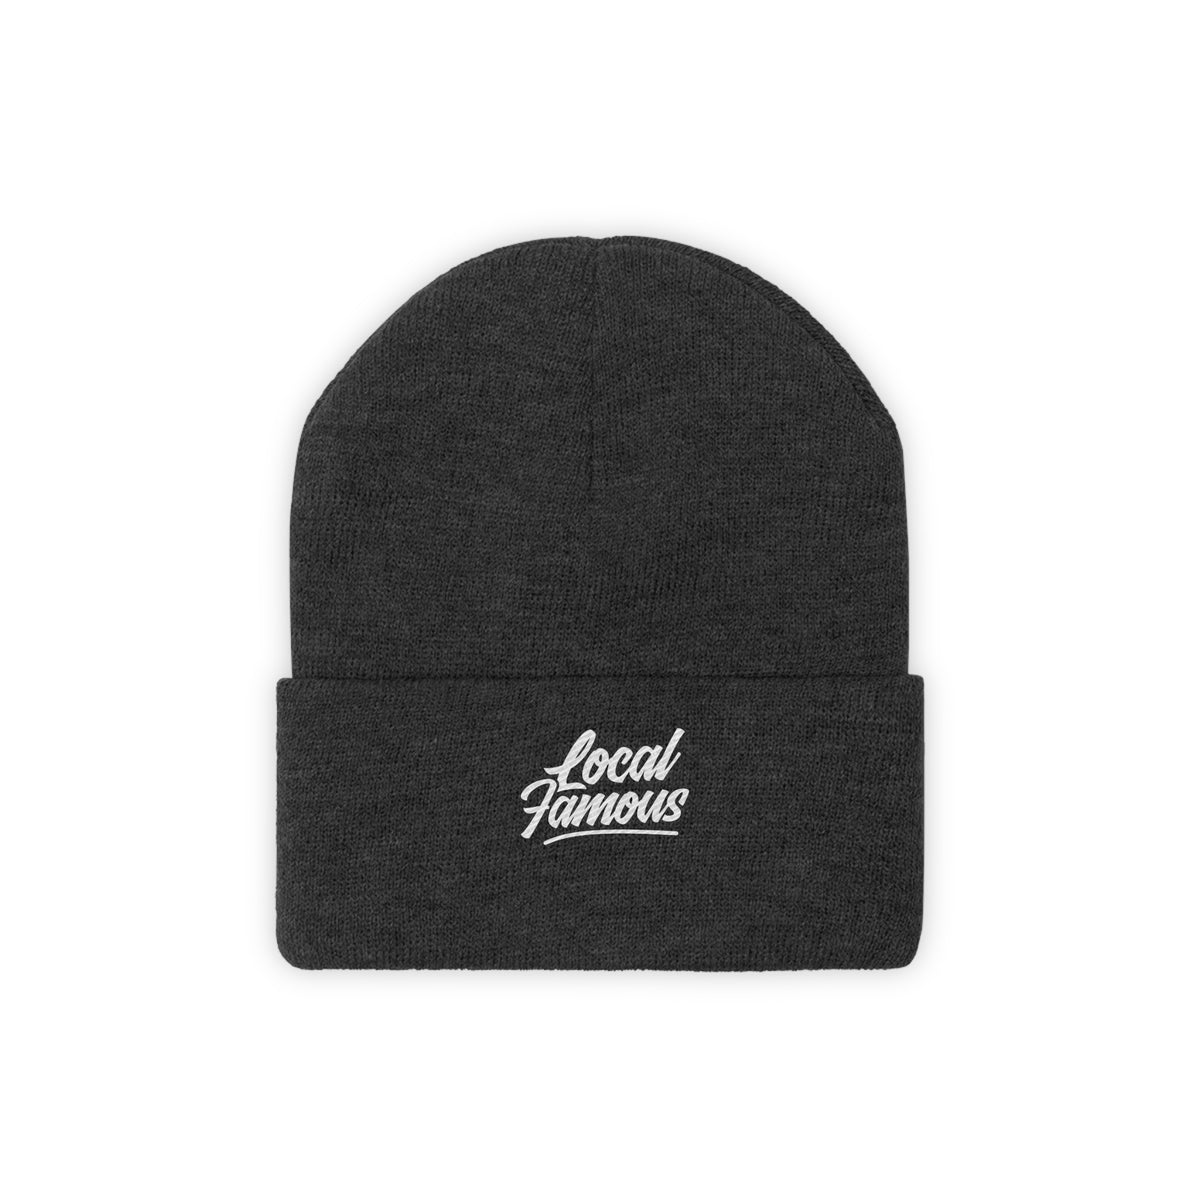 Local Famous Knit Beanie